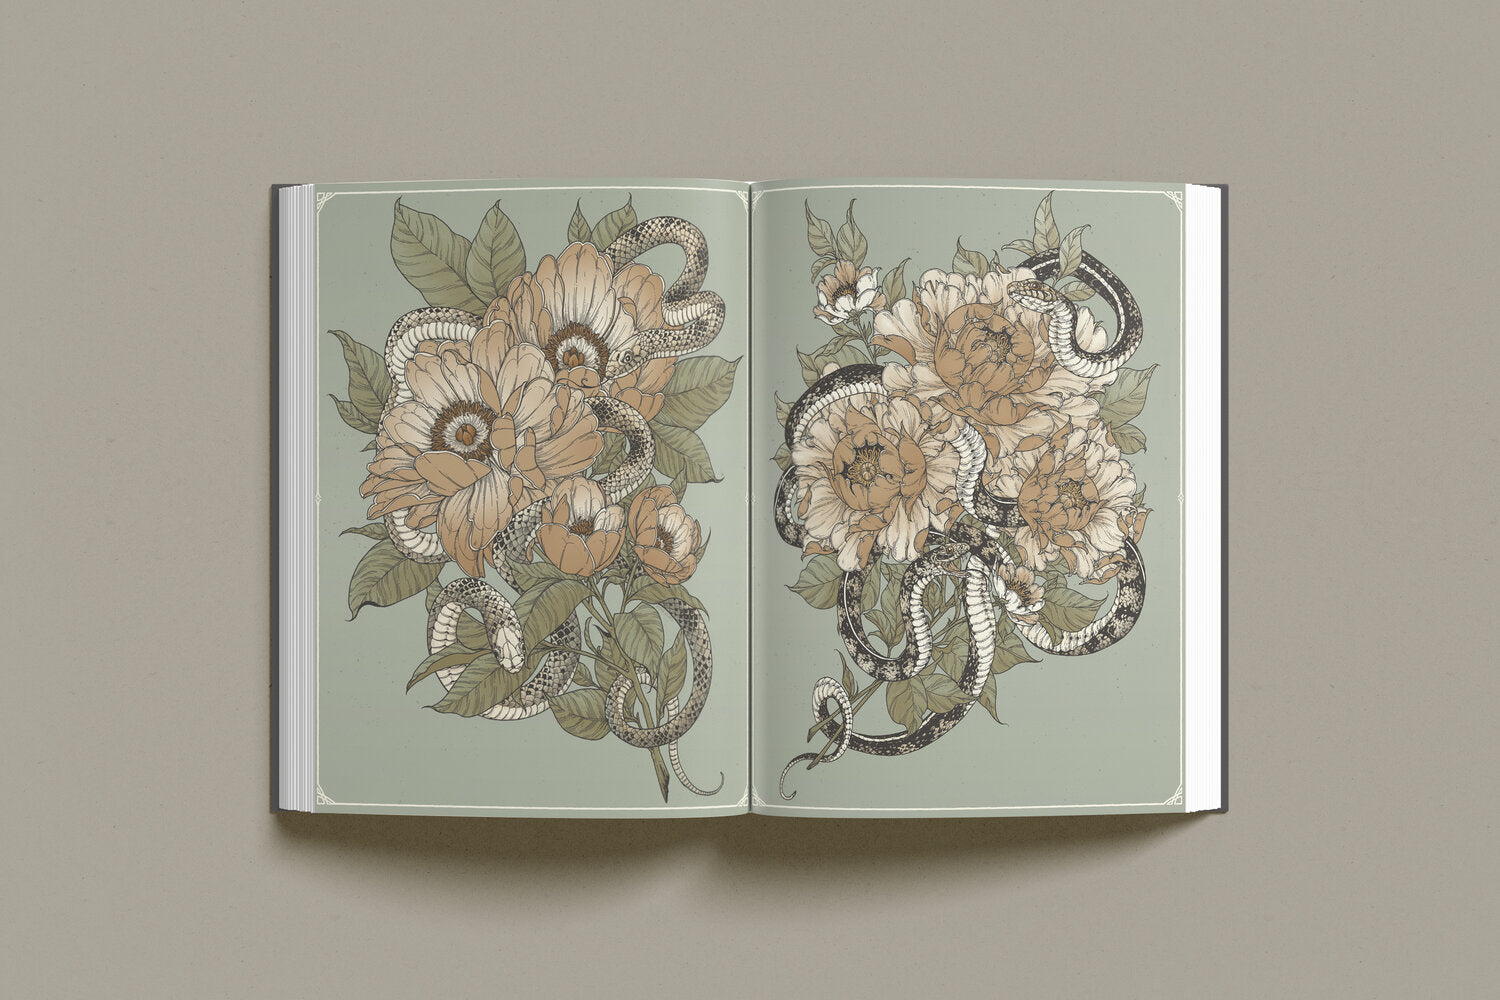 An image of an open book. Both pages show snakes and flowers.